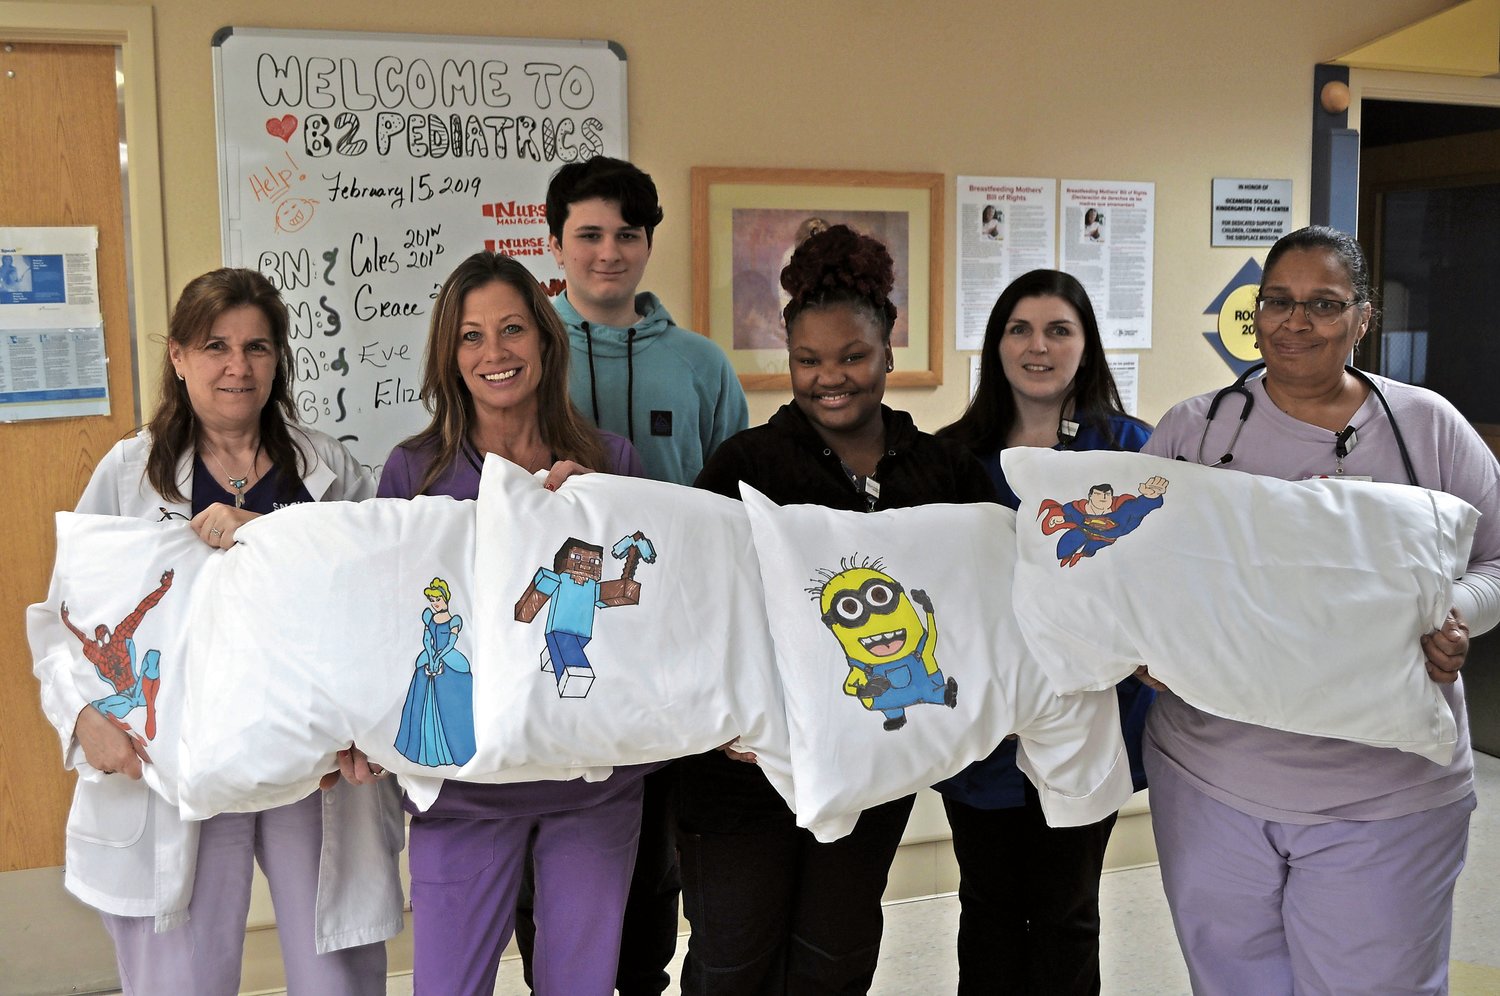 Nicholas Bolognini, third from left, drew cartoon characters and superheroes on a dozen pillowcases, which he donated to South Nassau Communities Hospital’s Pediatrics Department as a way to bring cheer to sick children. Bolognini was inspired by his cousin, Jessica Gruenfelder, who underwent four brain surgeries at the hospital after suffering two strokes. With Bolognini were South Nassau team members, from left, Lynn Bert, a nursing manager; Grace Maleweicz, a nurse; Shante Williams, a nursing assistant; Elizabeth Feil, a unit clerk; and Dawn Coles, a nurse.